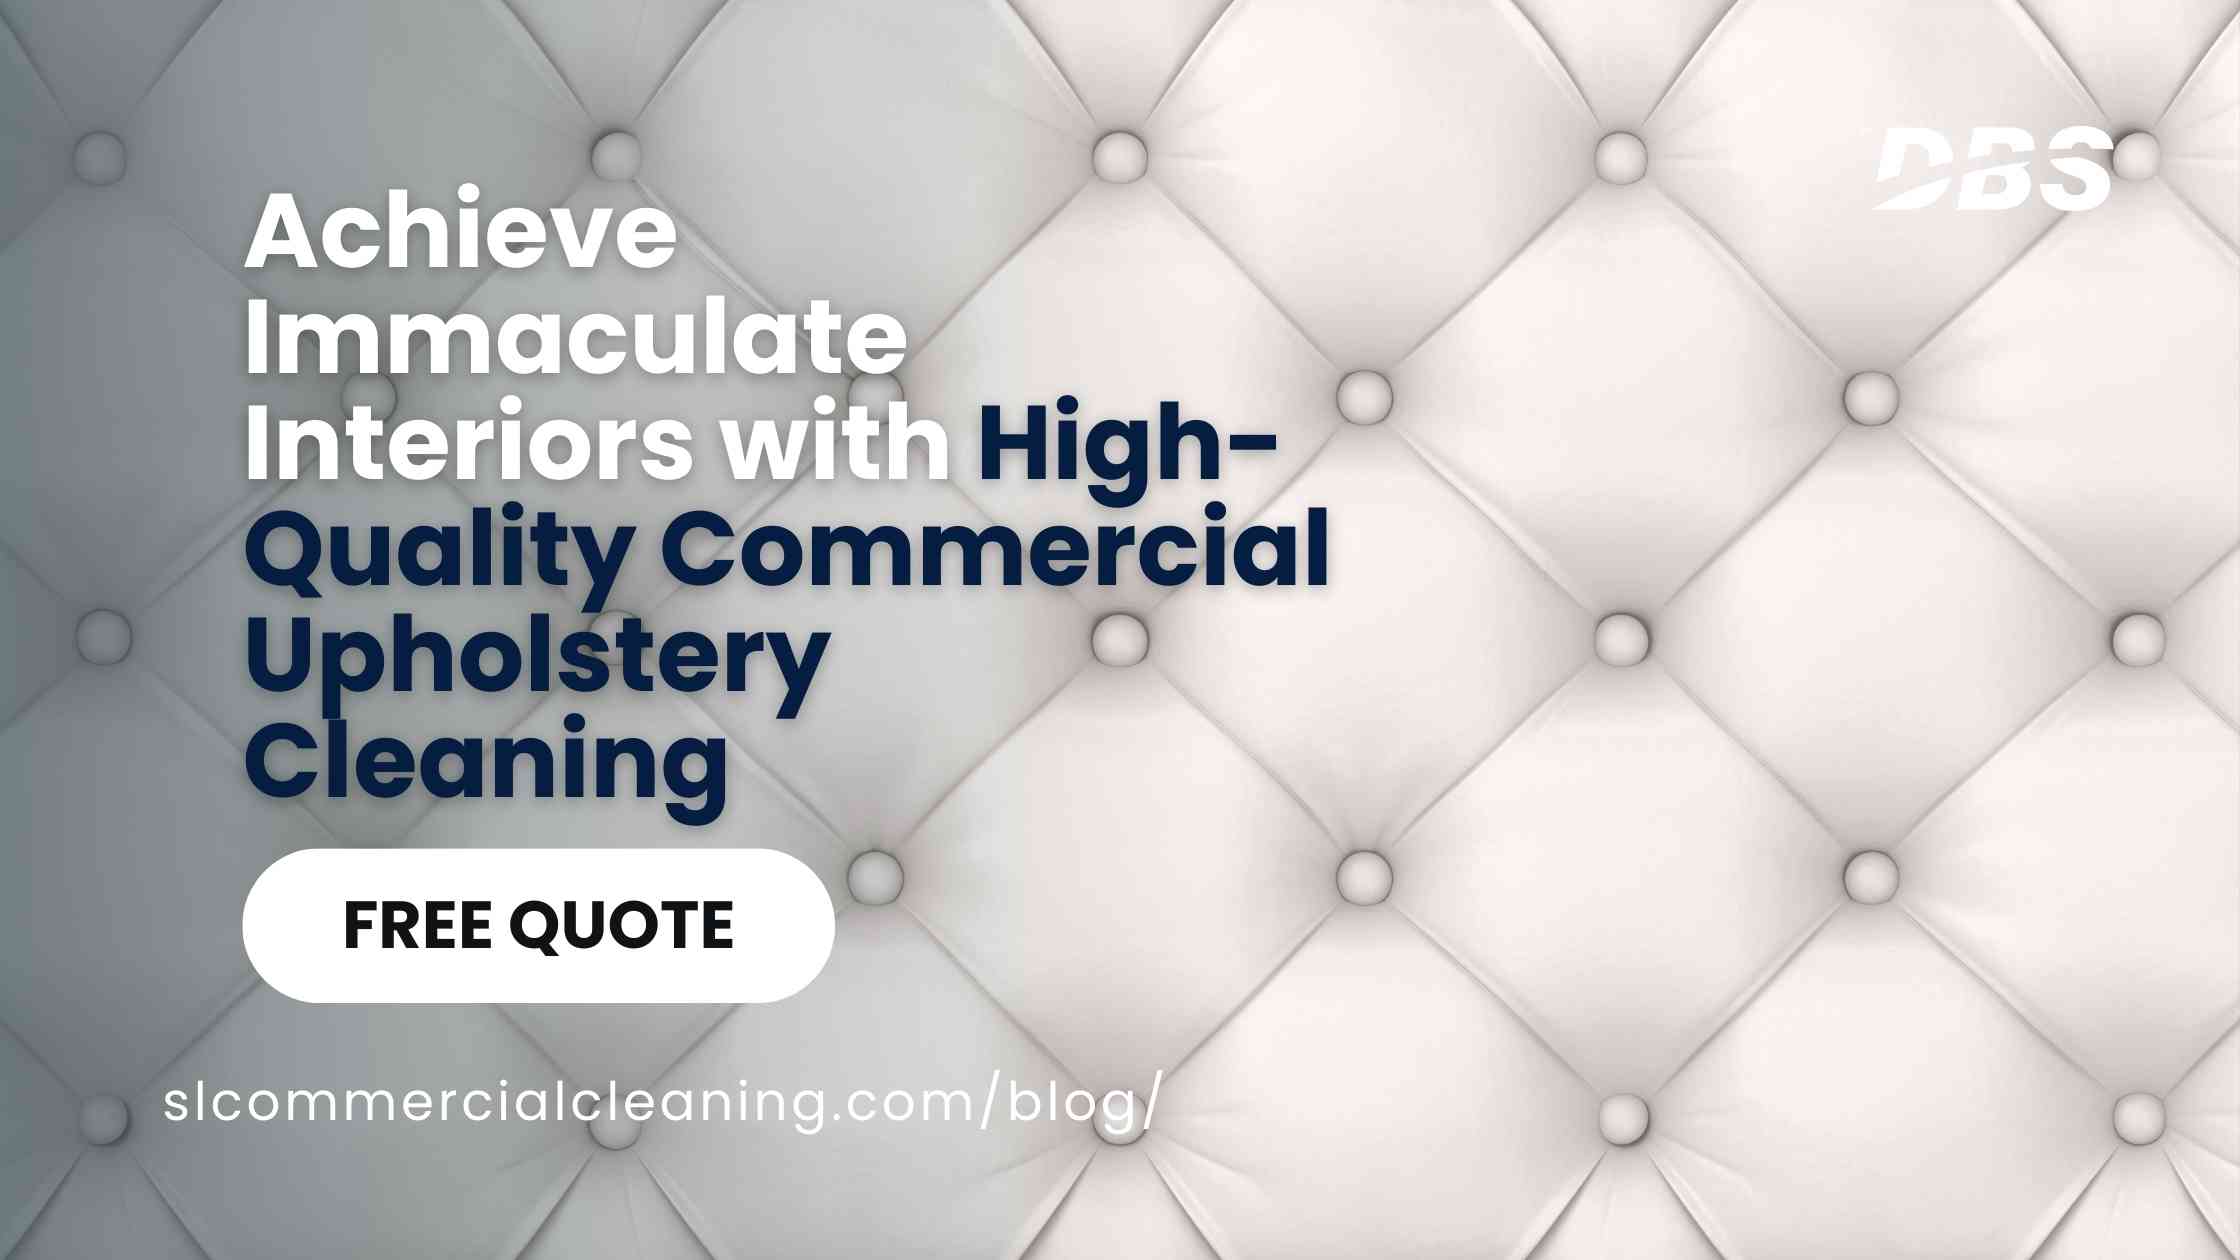 High-Quality Commercial Upholstery Cleaning